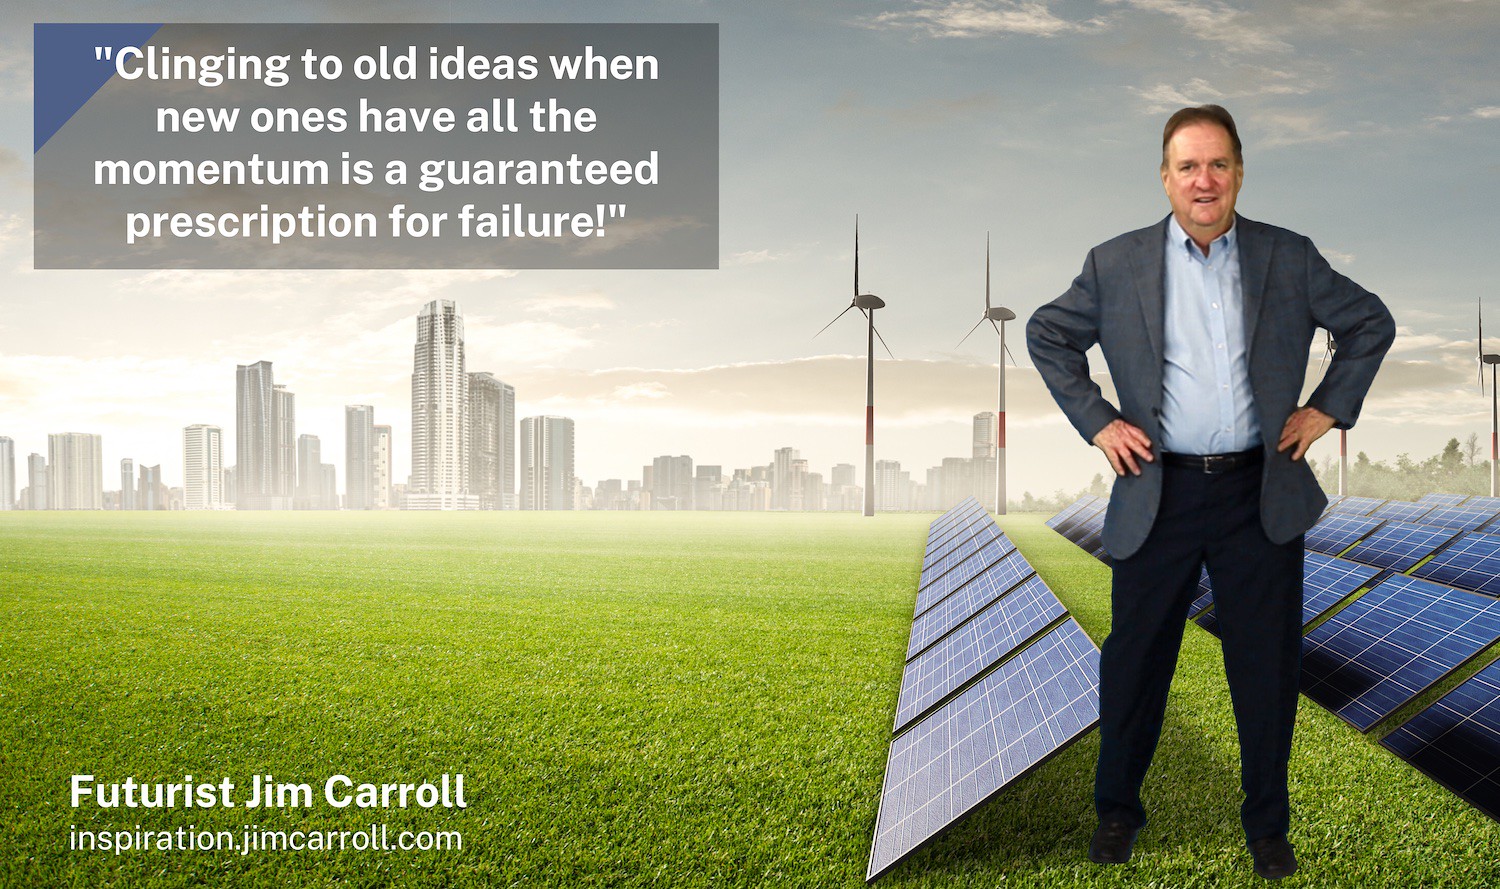 "Clinging to old ideas when new ones have all the momentum is a guaranteed prescription for failure!" - Futurist Jim Carroll